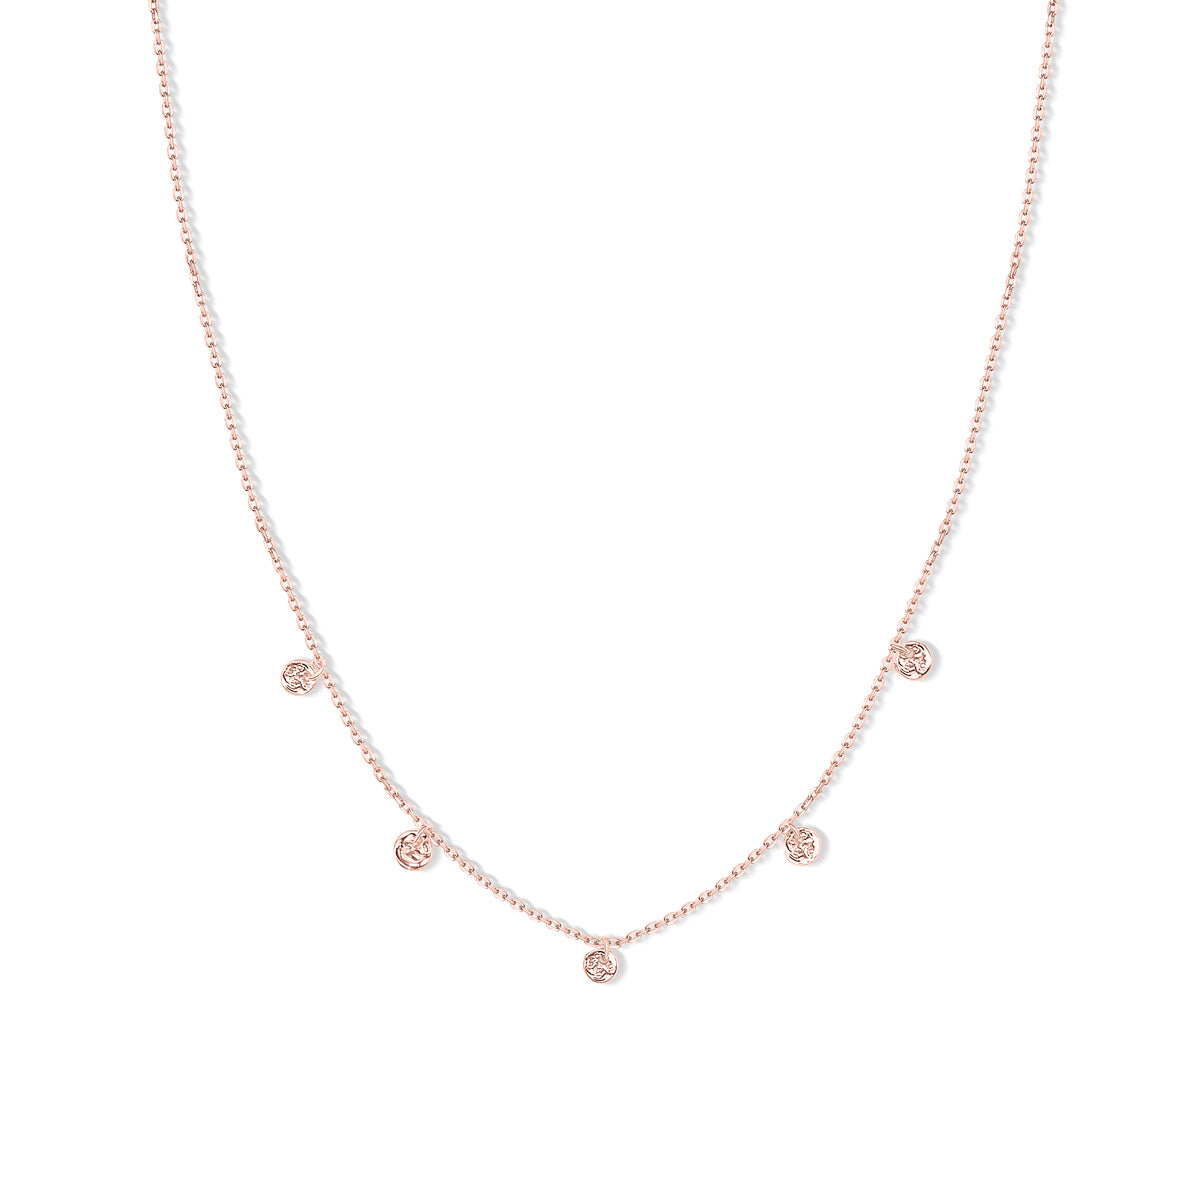 Rose gold chain necklace with pendants